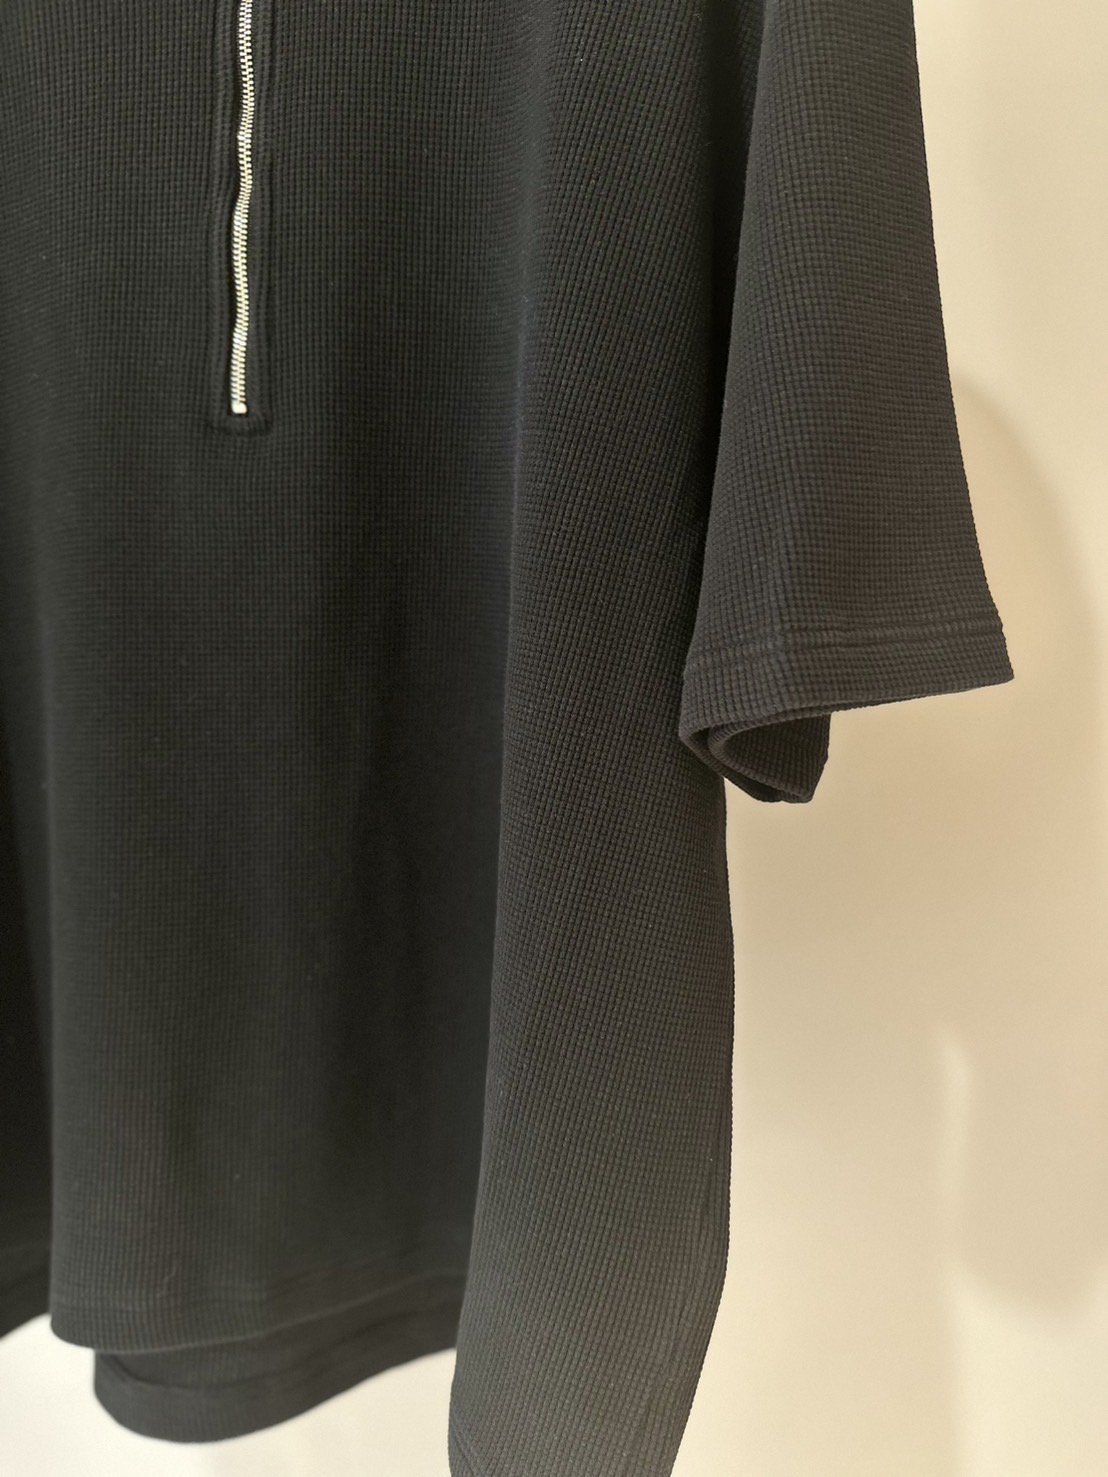 ALLEGE<br />AllegeKANEMASA Waffle Harf zip S/S / Black<img class='new_mark_img2' src='https://img.shop-pro.jp/img/new/icons14.gif' style='border:none;display:inline;margin:0px;padding:0px;width:auto;' />